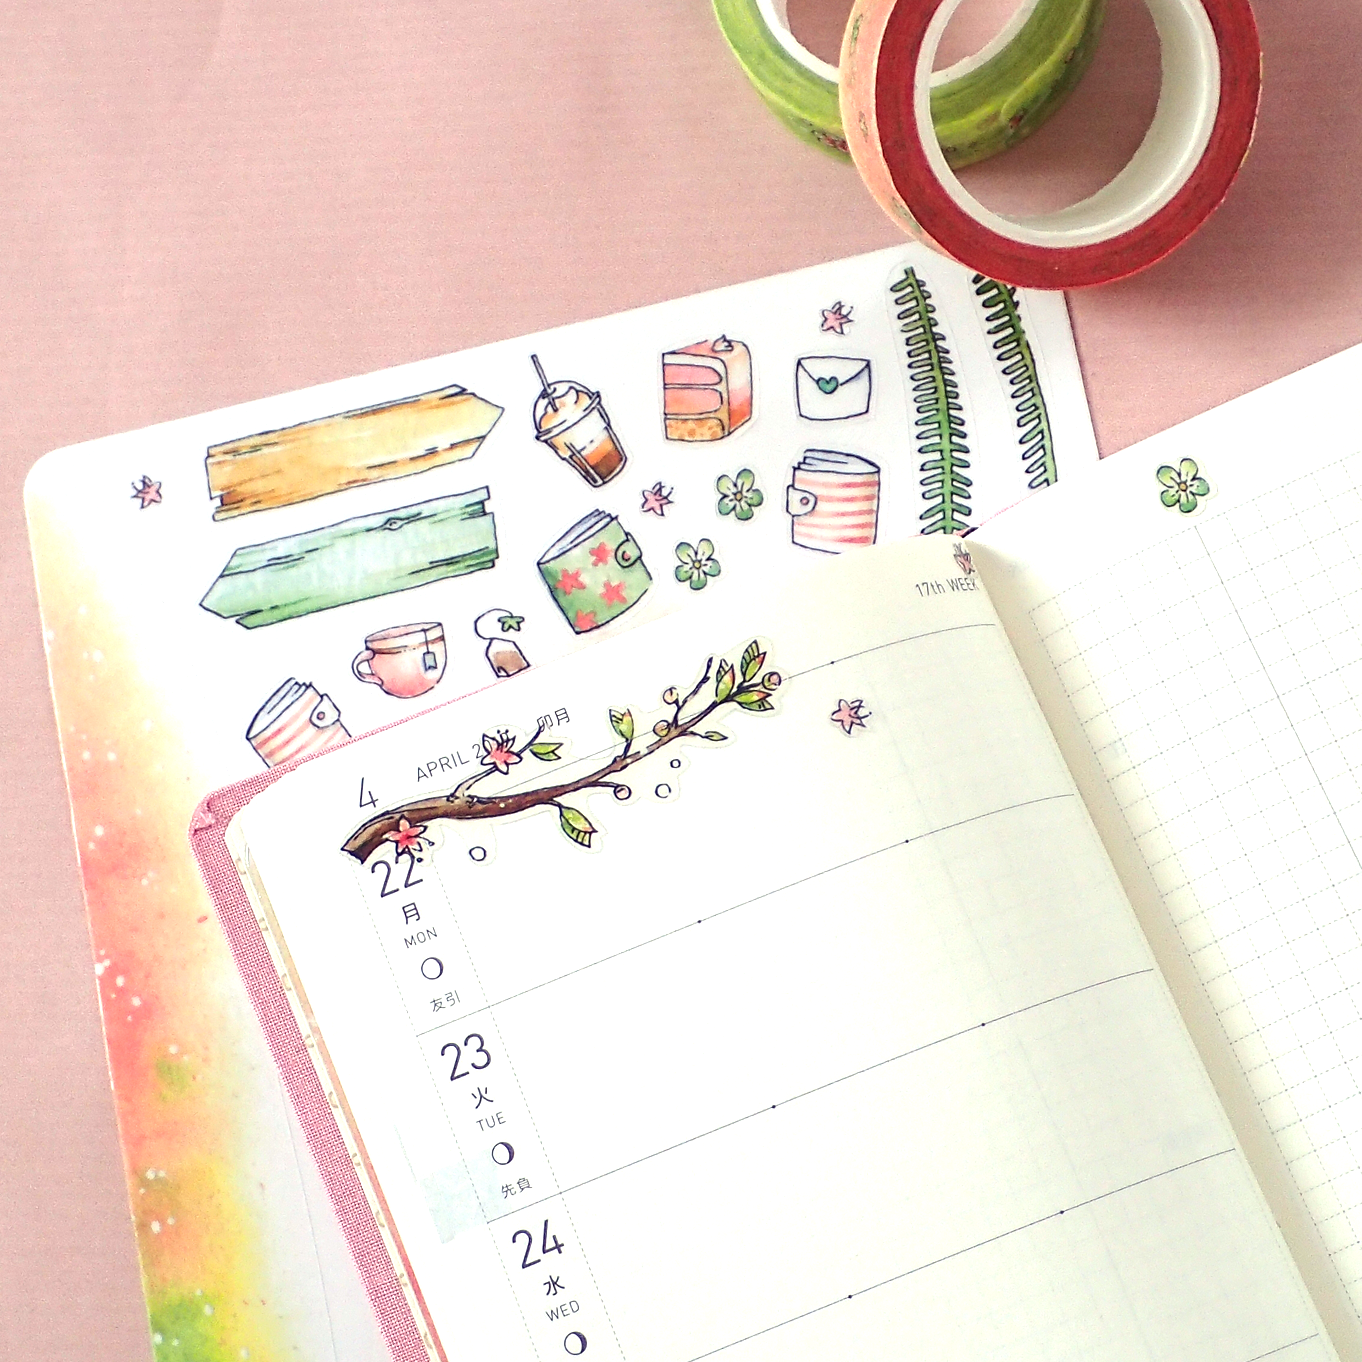 Watercolor Stickers Medley for Spring Time in Pink and Green &quot;Be Creative&quot;